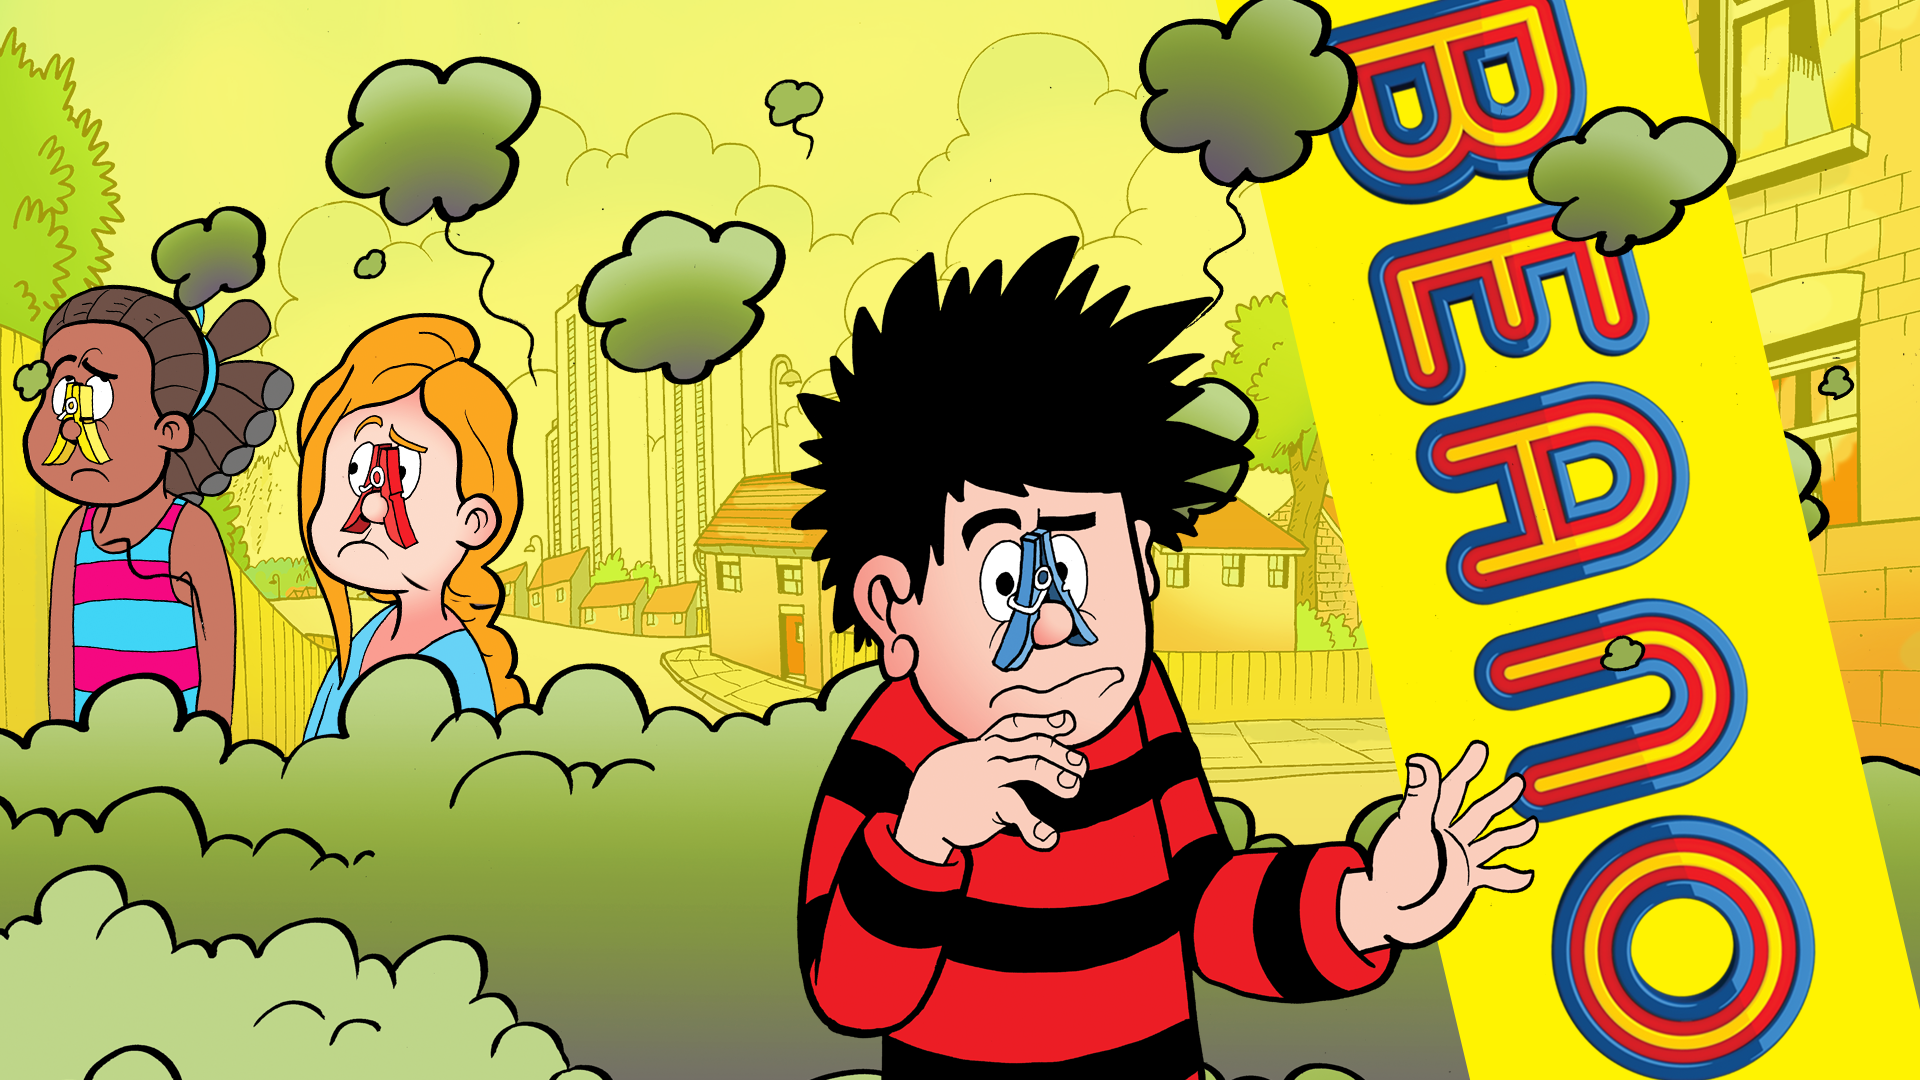 Inside Beano 3999 - The Great Stink Mystery